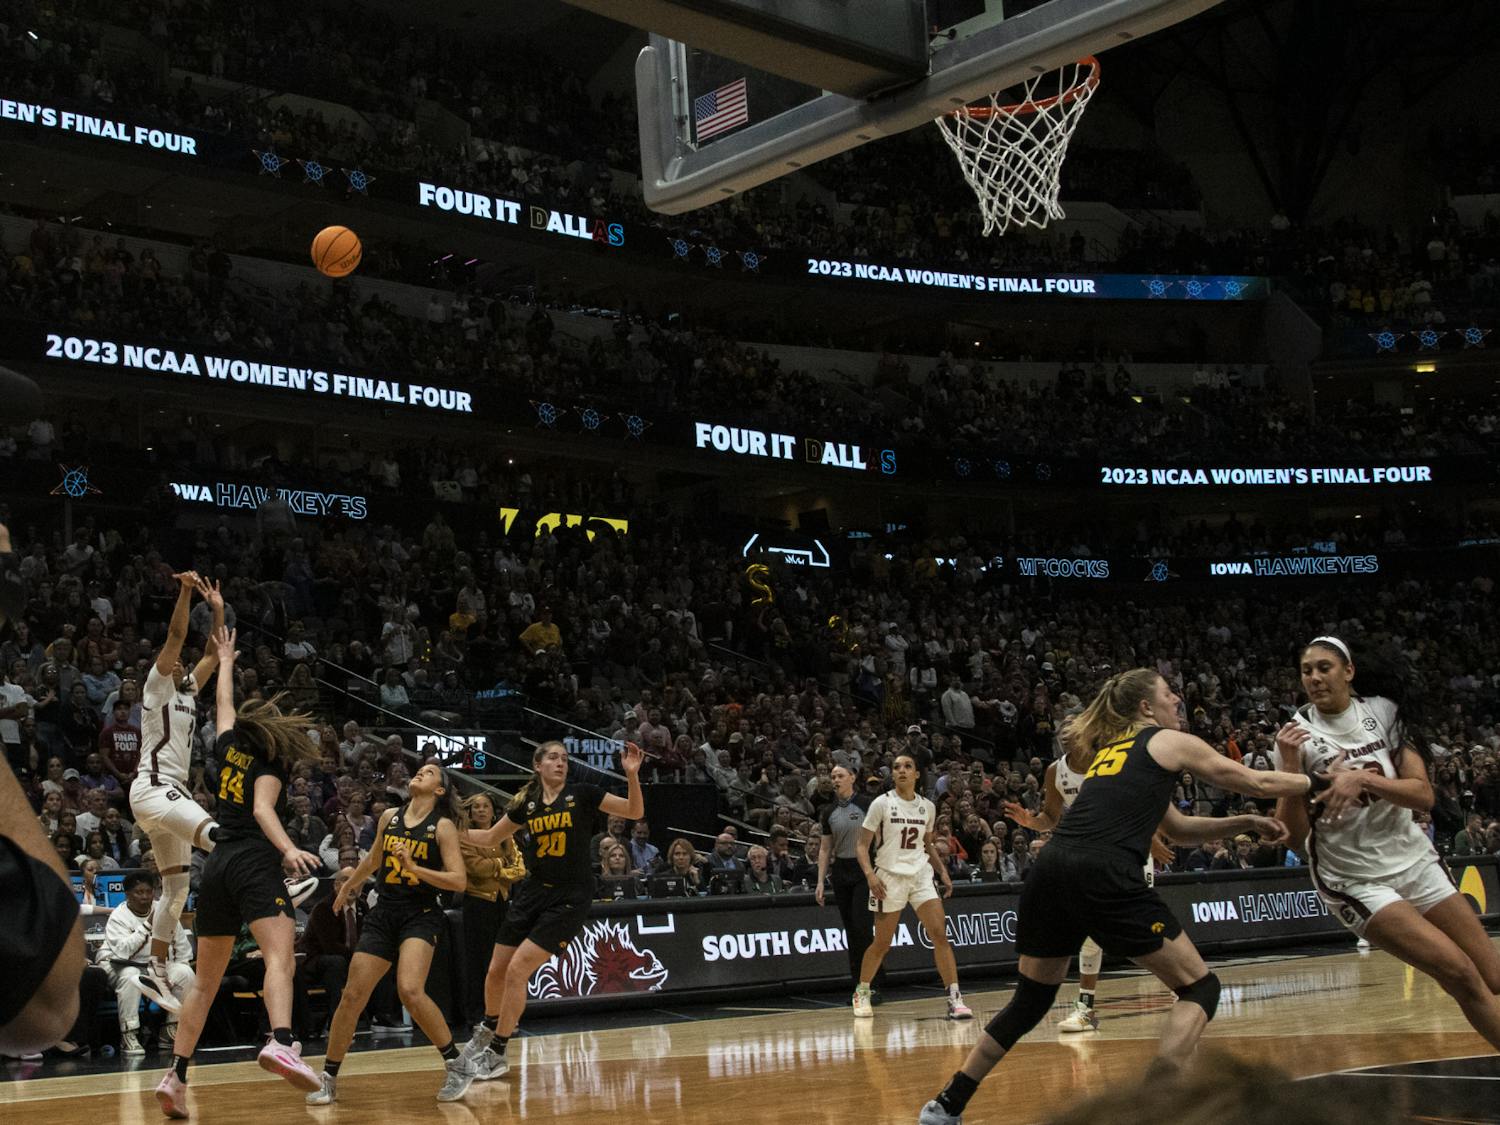 Cooke steps back and attempts a 3-pointer to decrease the score deficit in the Final Four match against the University of Iowa on March 31, 2023. Cooke led her team, making 18 points and five assists in the first half of the game, and was named the Ann Meyers Drysdale Shooting Guard of the Year.